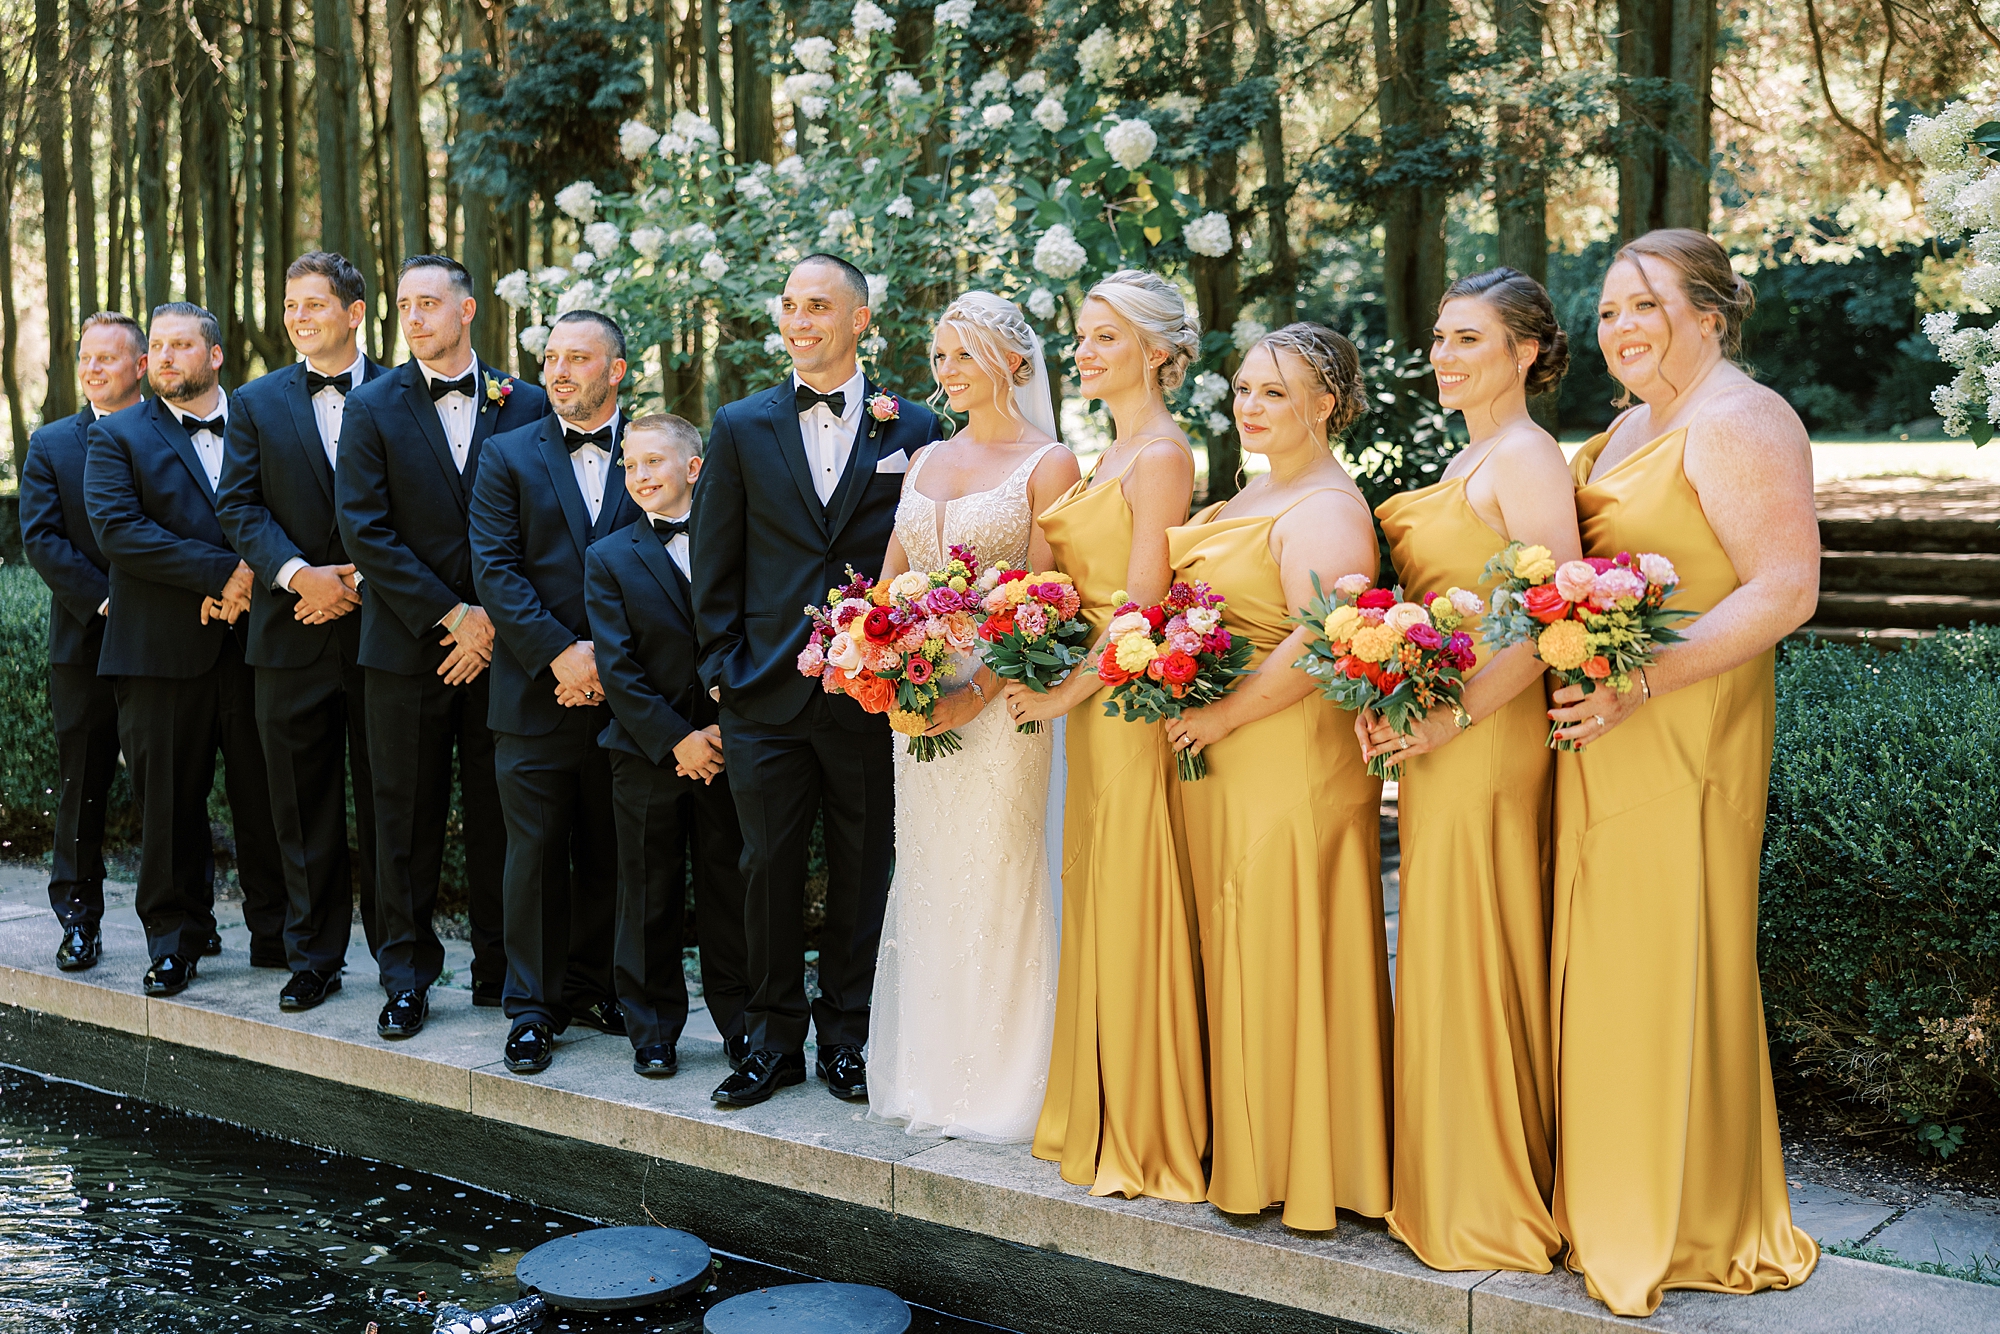 wedding party in gold and black attire stands on edge of pool at Parque Ridley Creek